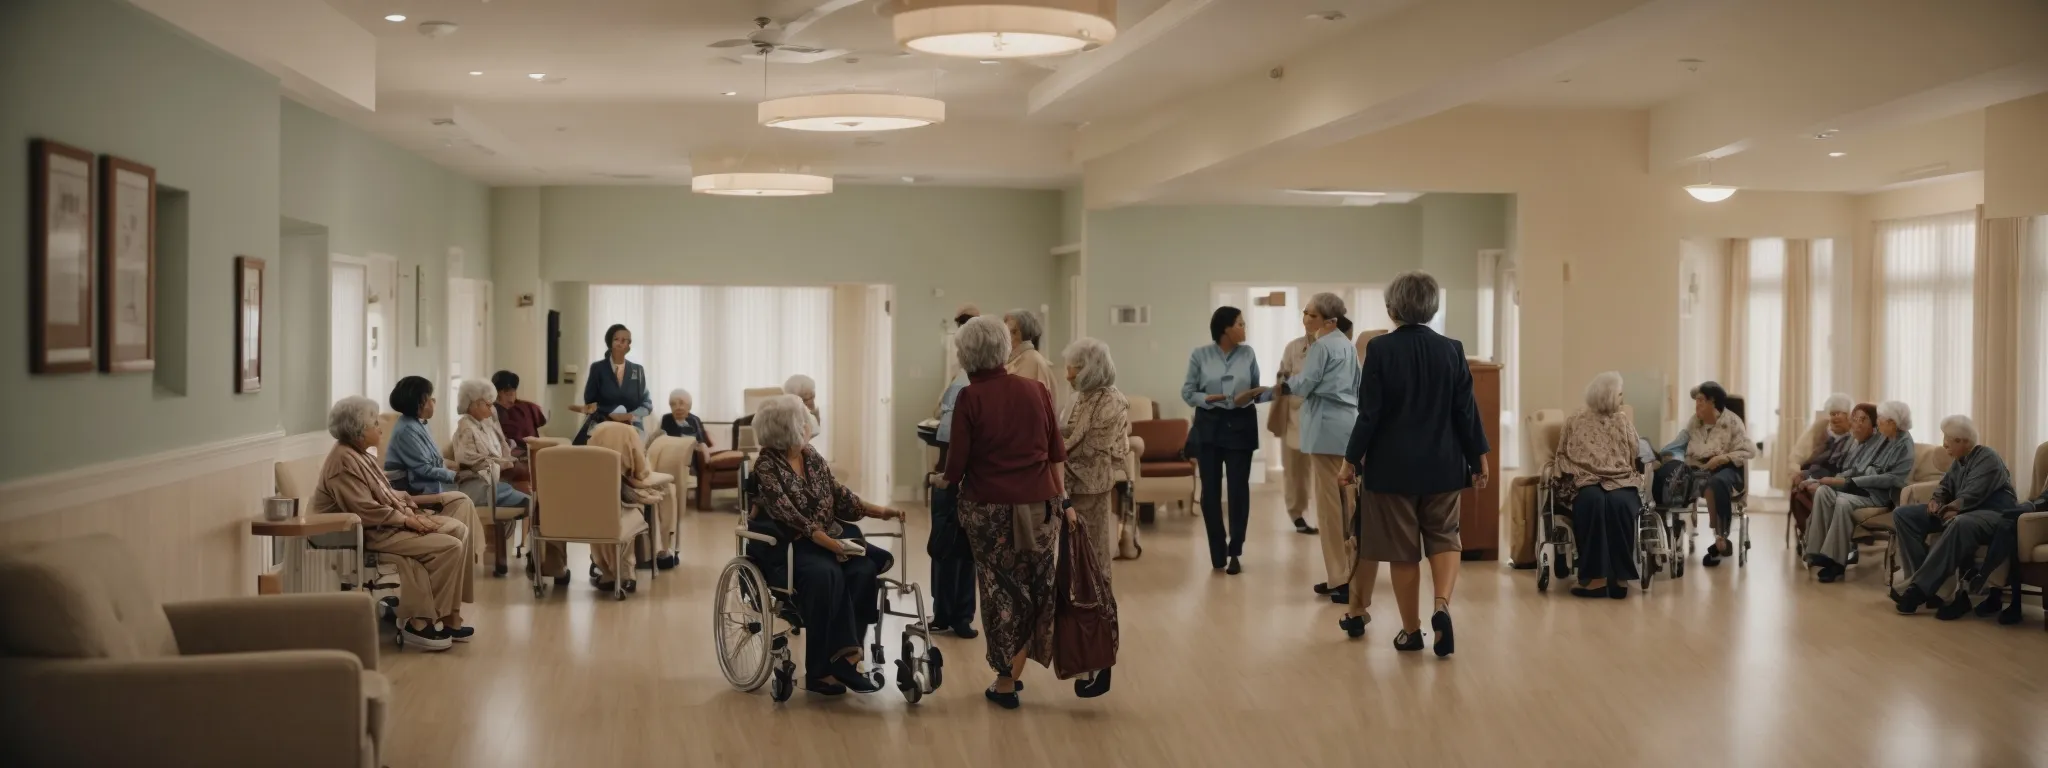 a camera records as a staff member guides a walk-through tour of a spacious, well-lit nursing home common area, with residents and caregivers interacting in the background.